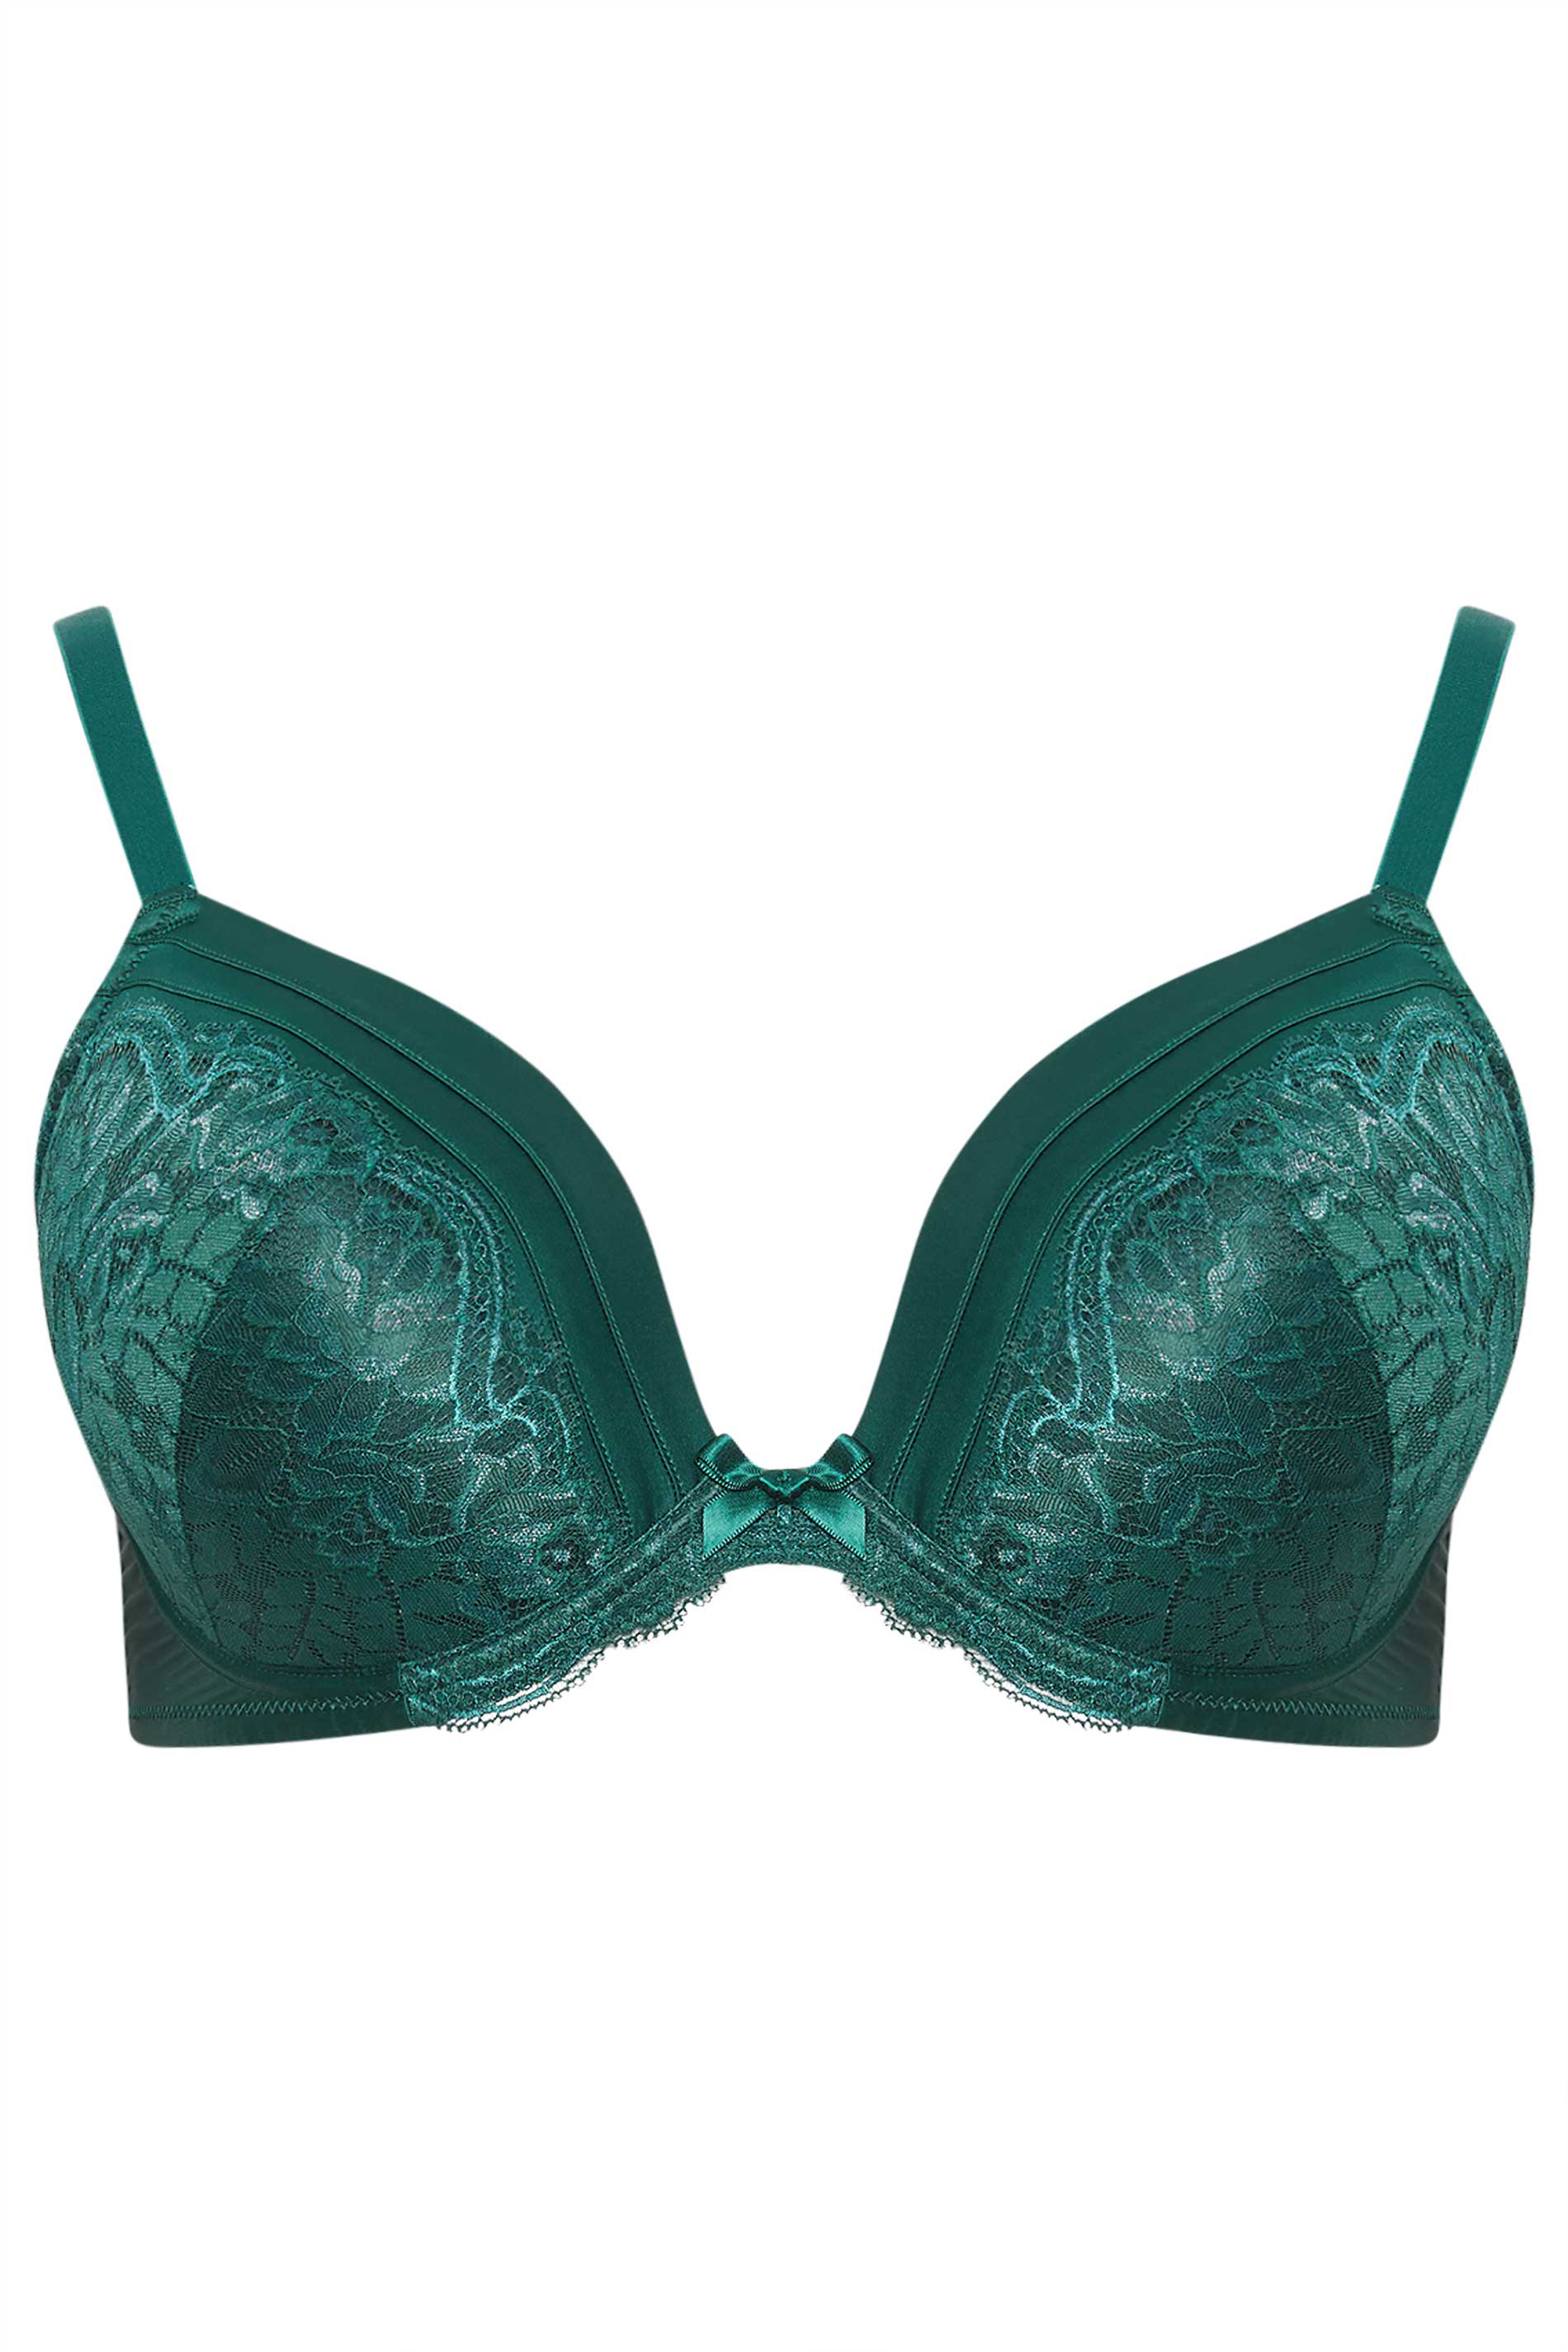 Sea green lace underwire push-up Bra- bow detail - Size 30C